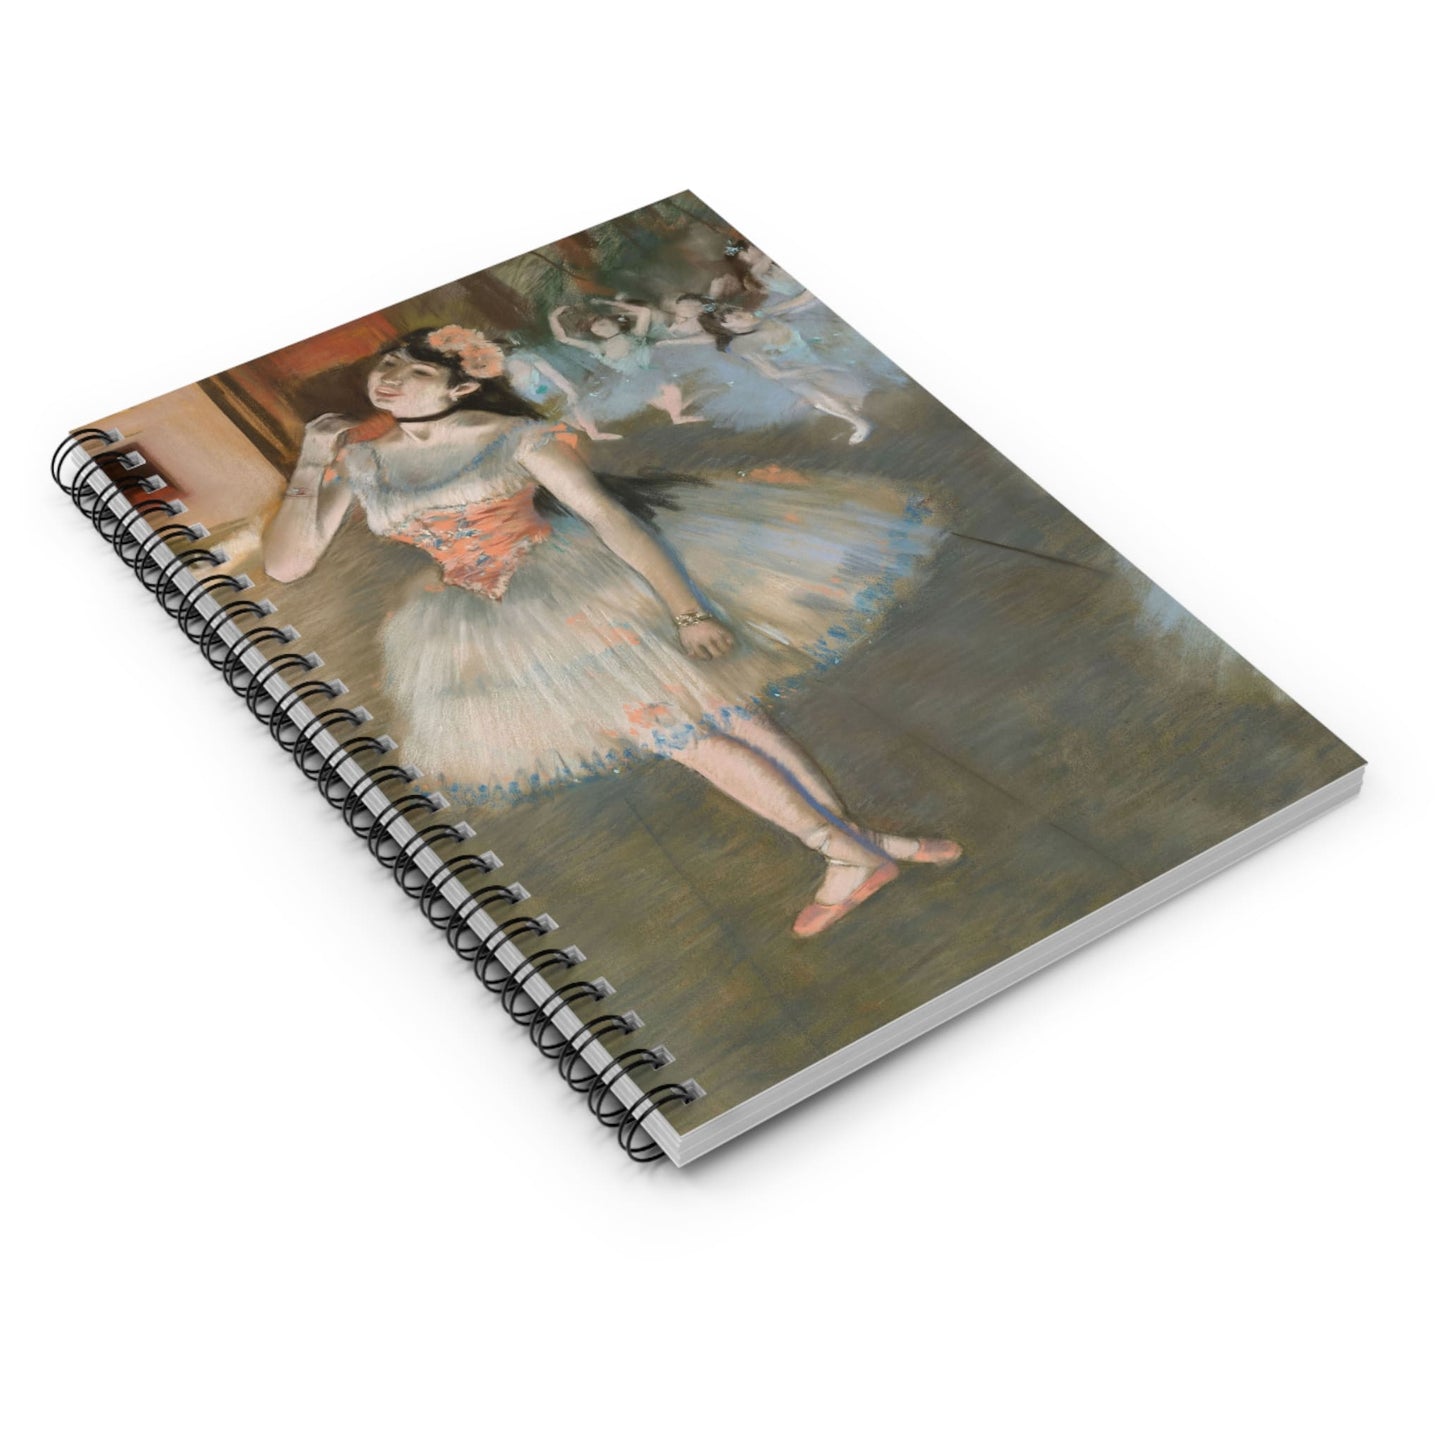 Ballerina Painting Spiral Notebook Laying Flat on White Surface